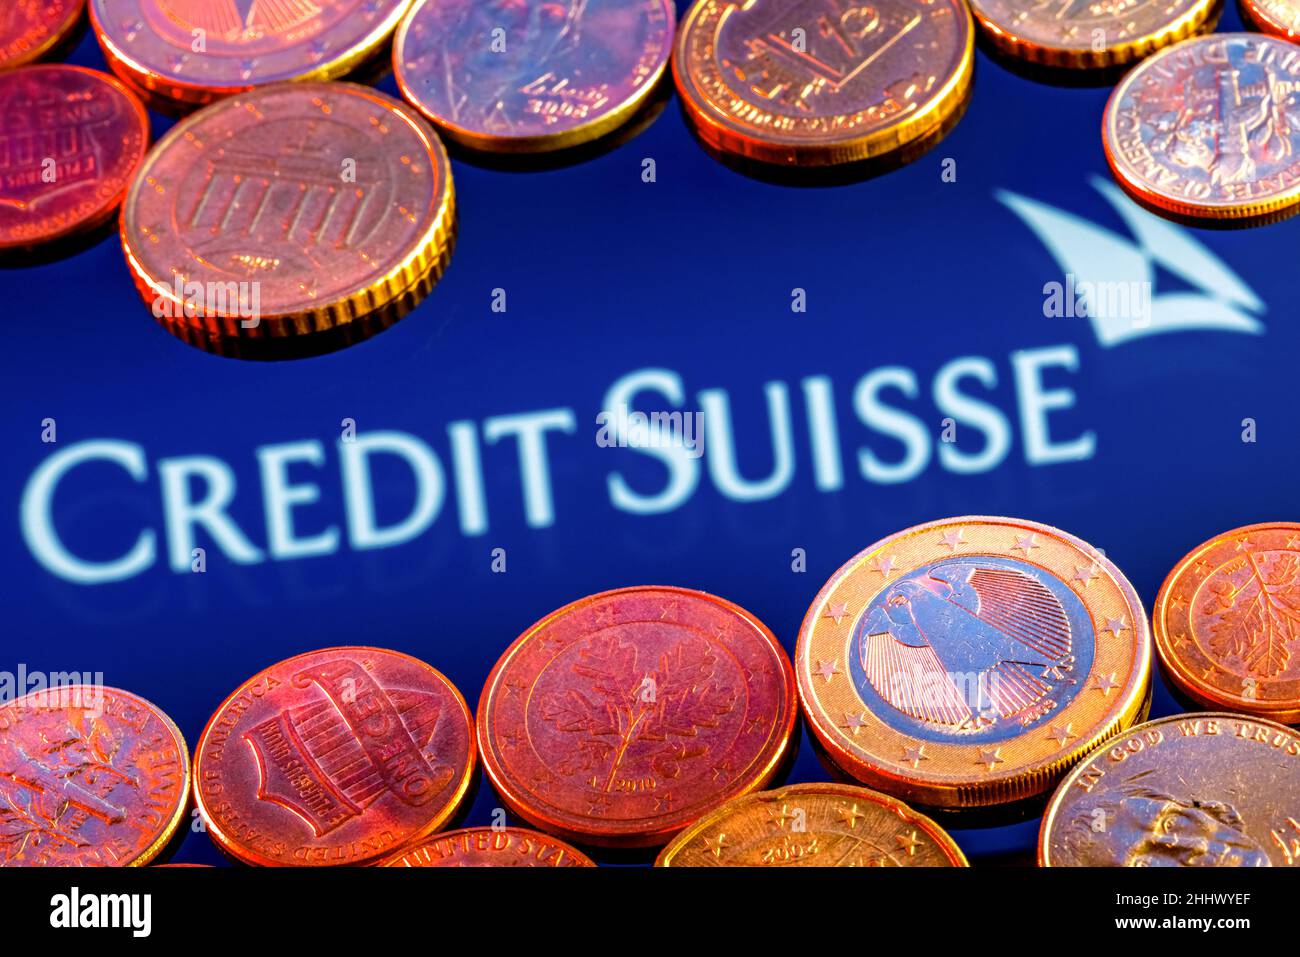 Variety of metal coins on background of Credit Suisse bank logo Stock Photo